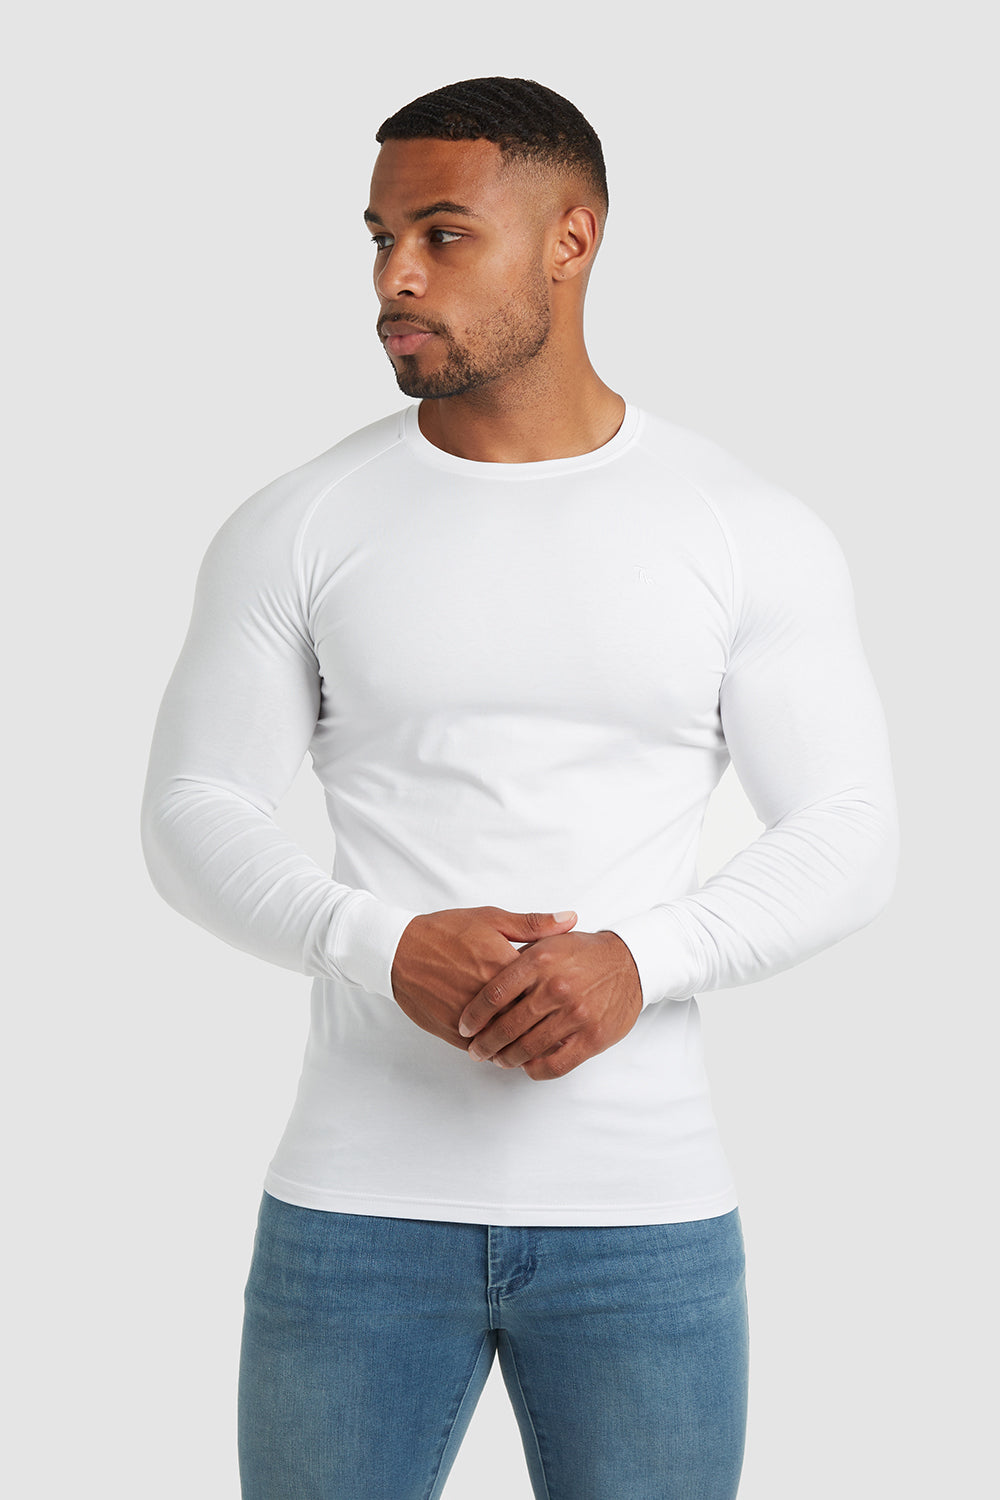 Athletic Fit T-Shirt (LS) in White - TAILORED ATHLETE - USA